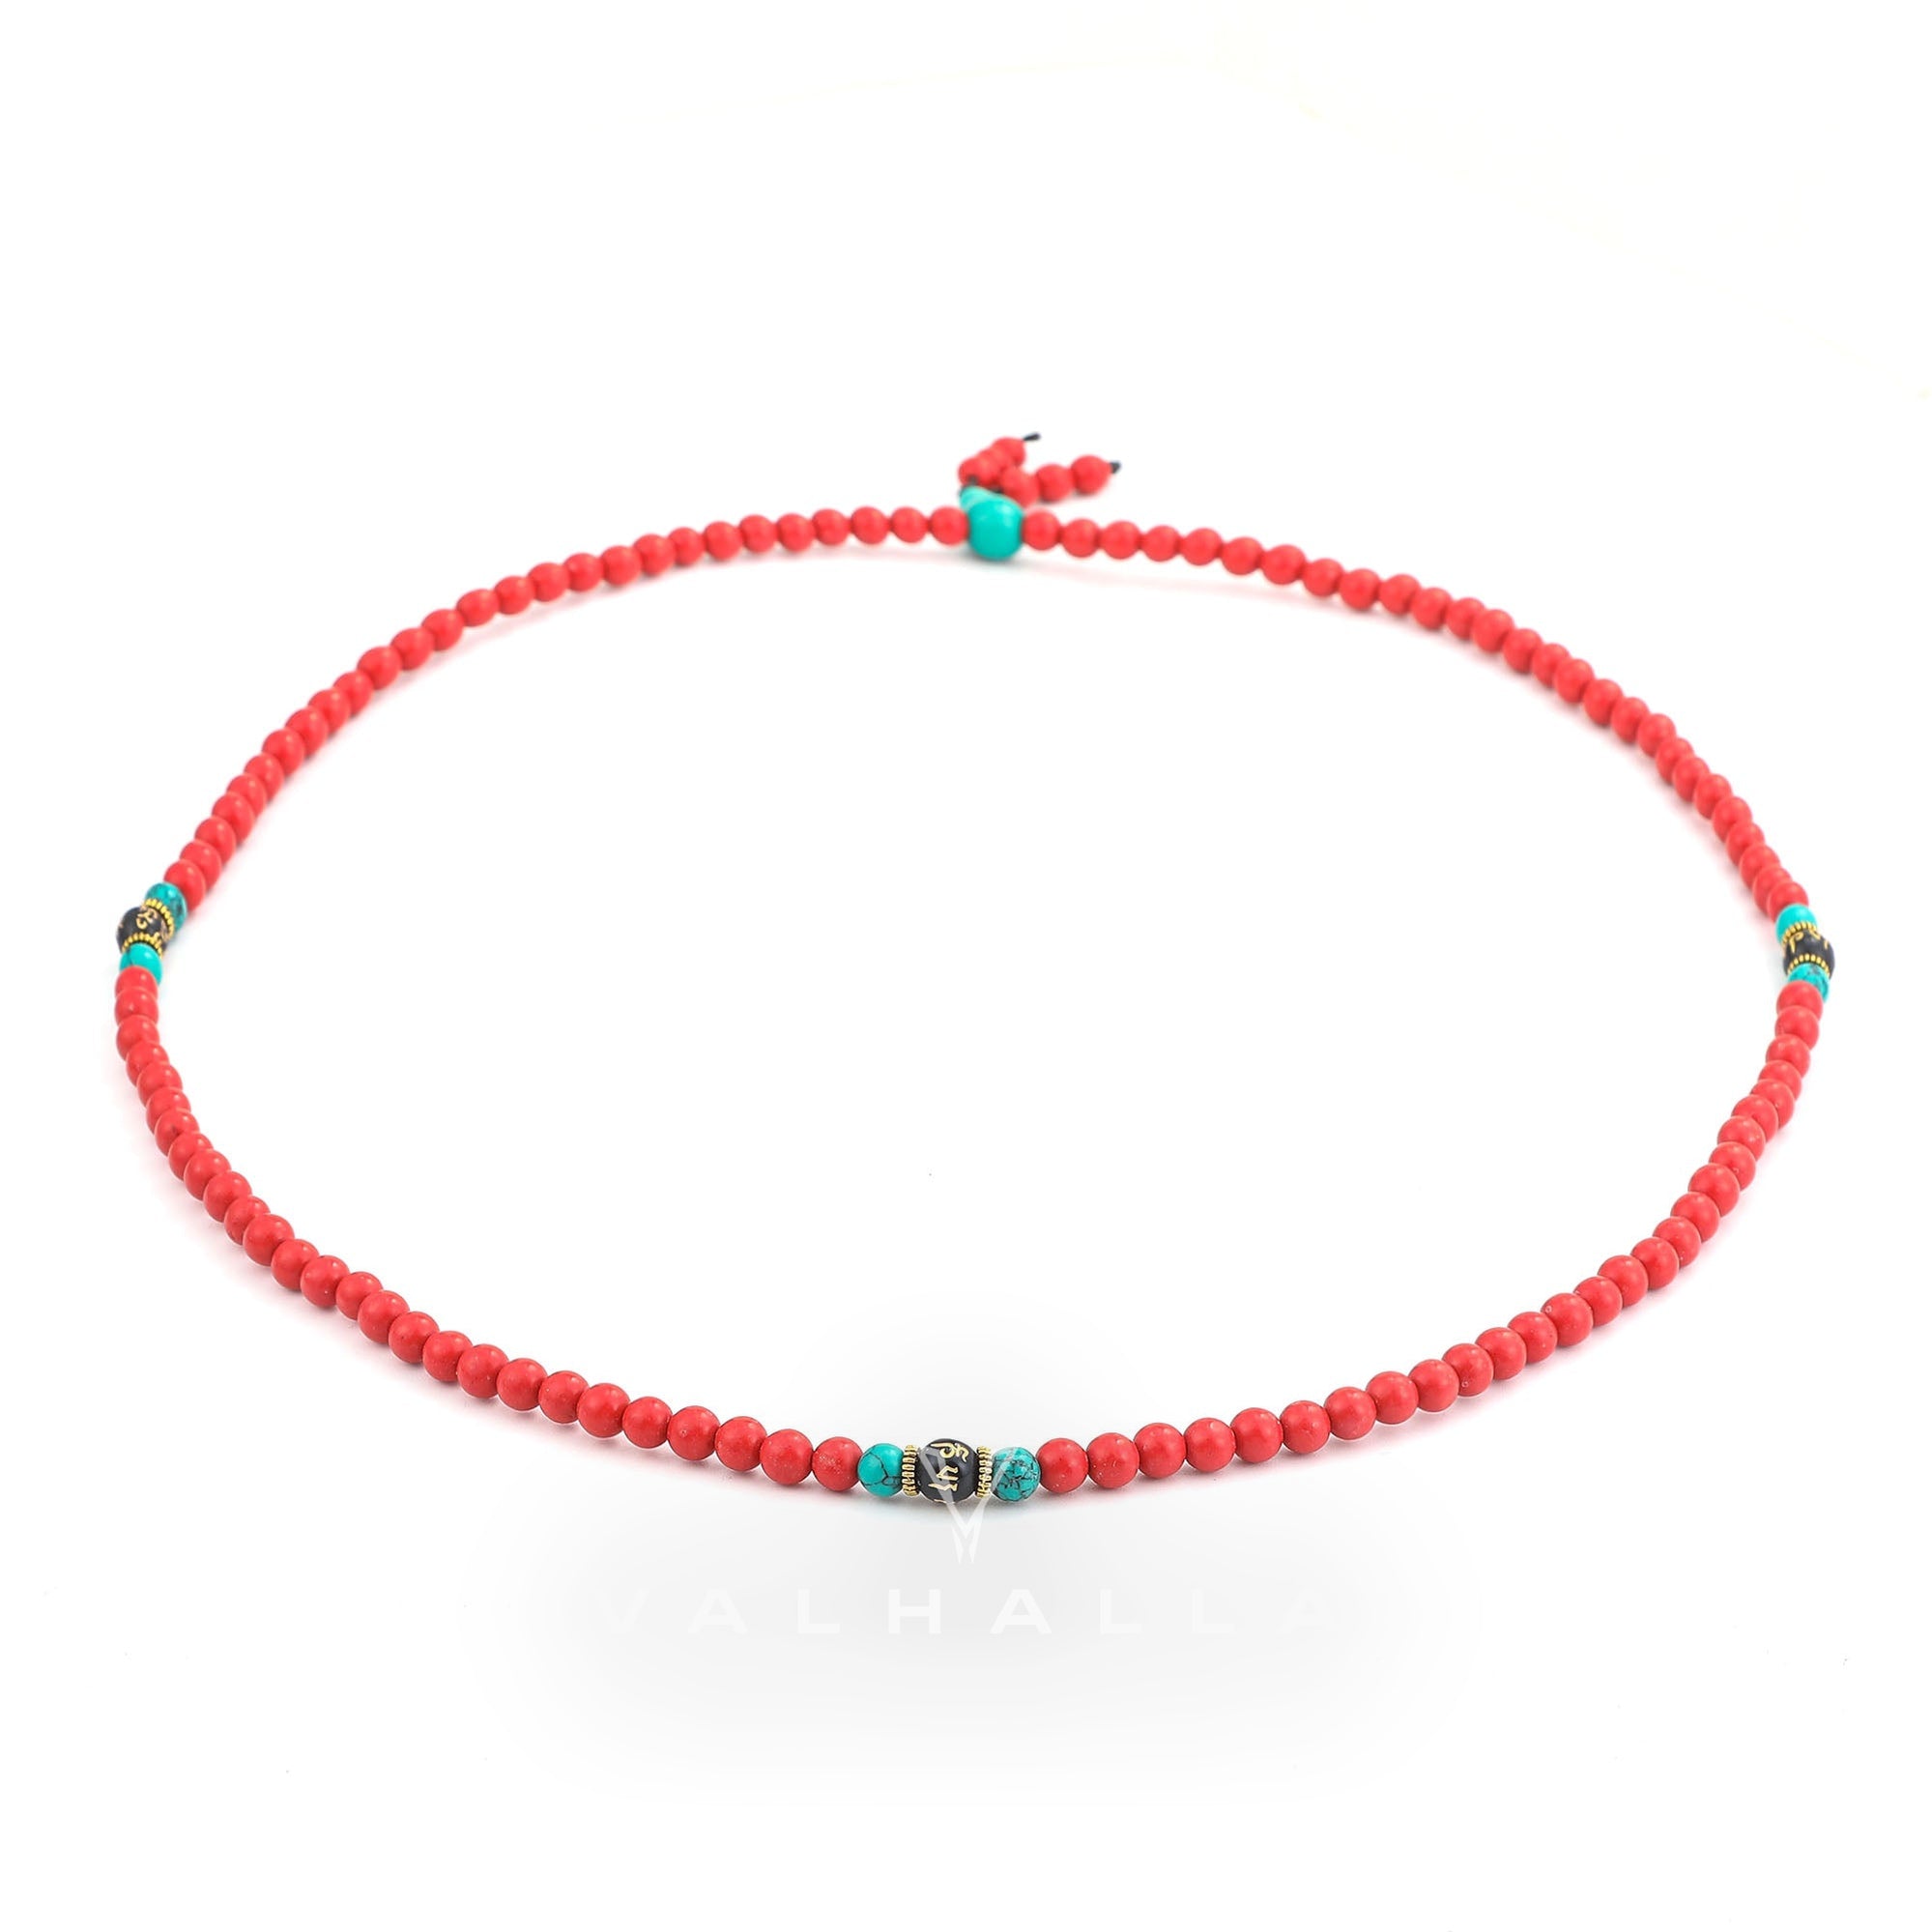 Prayer Beads Turquoise Necklace Stainless Steel